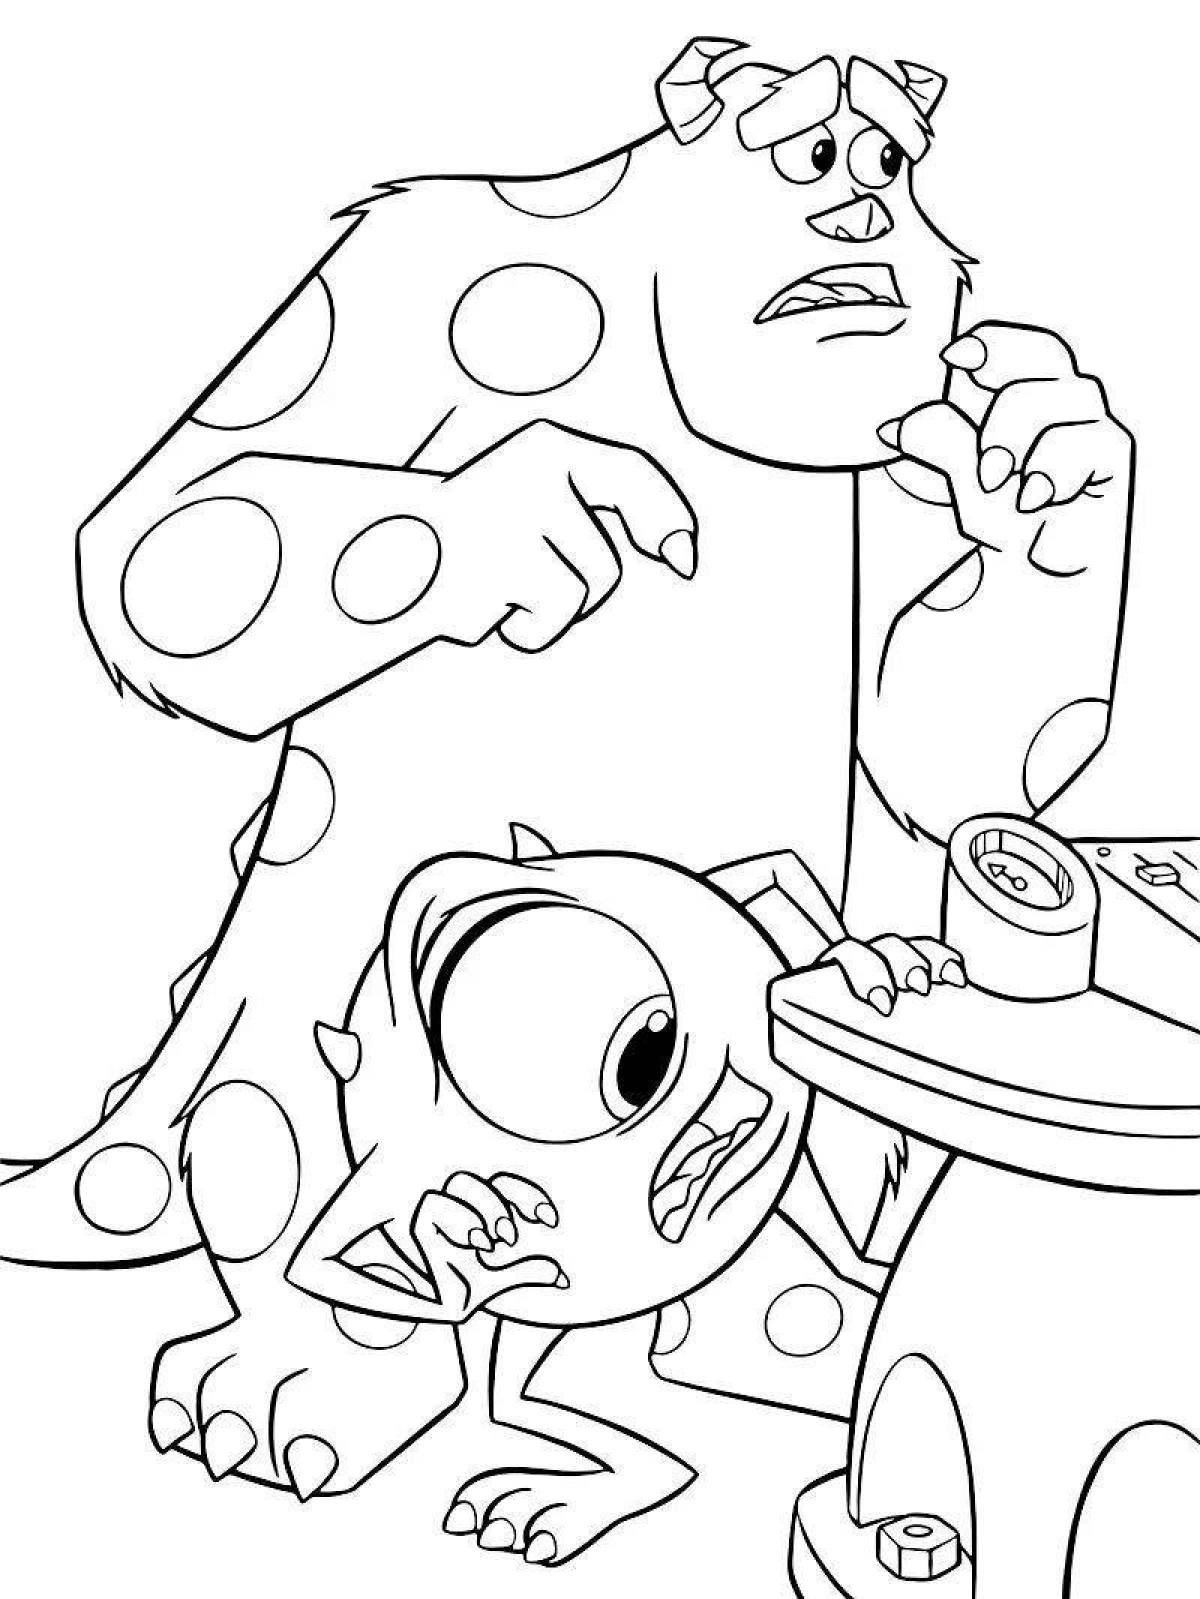 Coloring page happy sally and boo